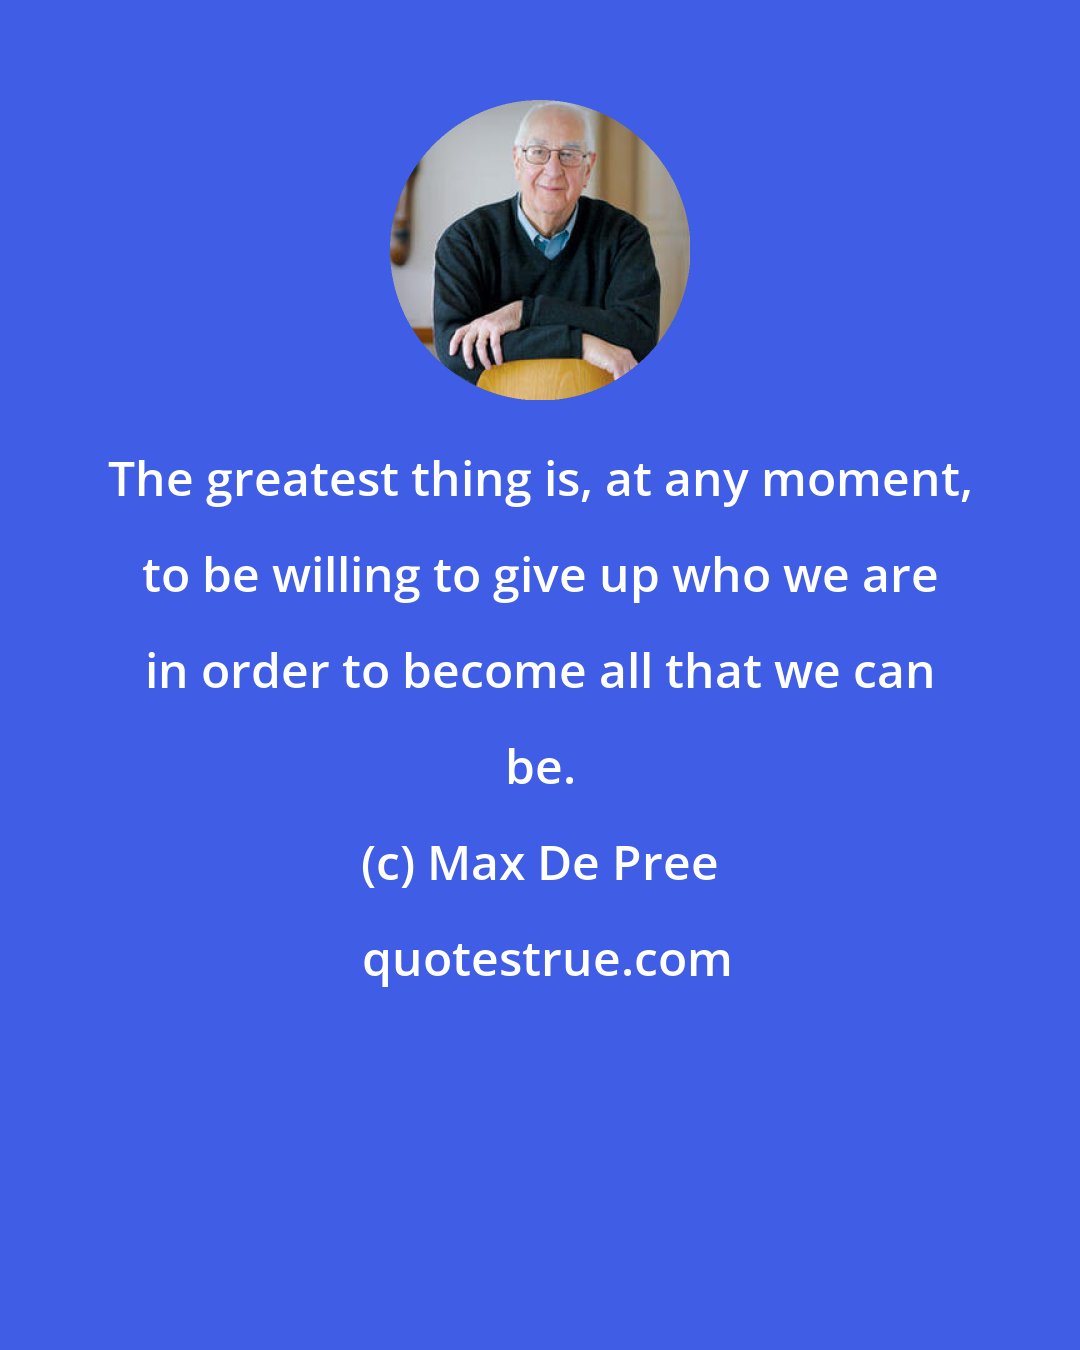 Max De Pree: The greatest thing is, at any moment, to be willing to give up who we are in order to become all that we can be.